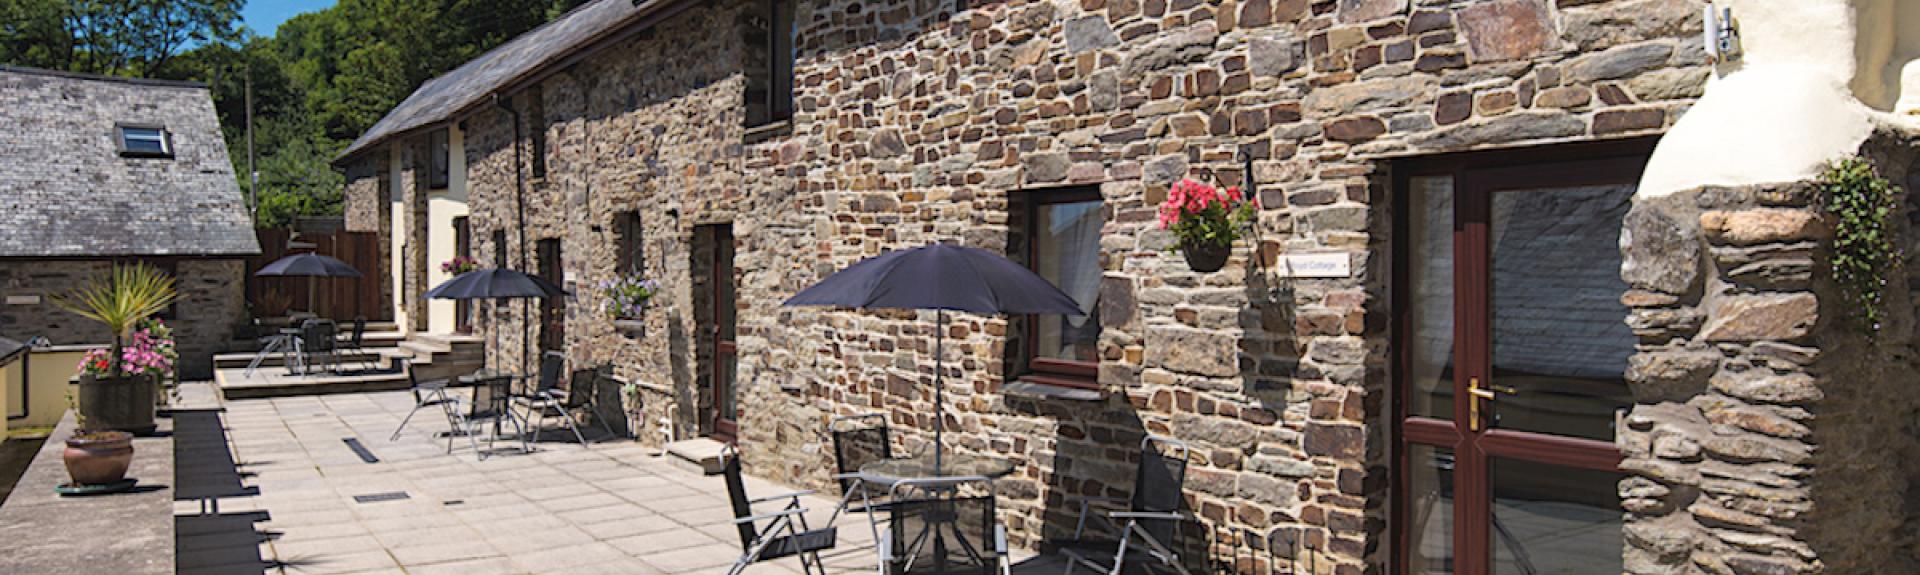 A stone-built barn conversion overlooks a patio with dining table.